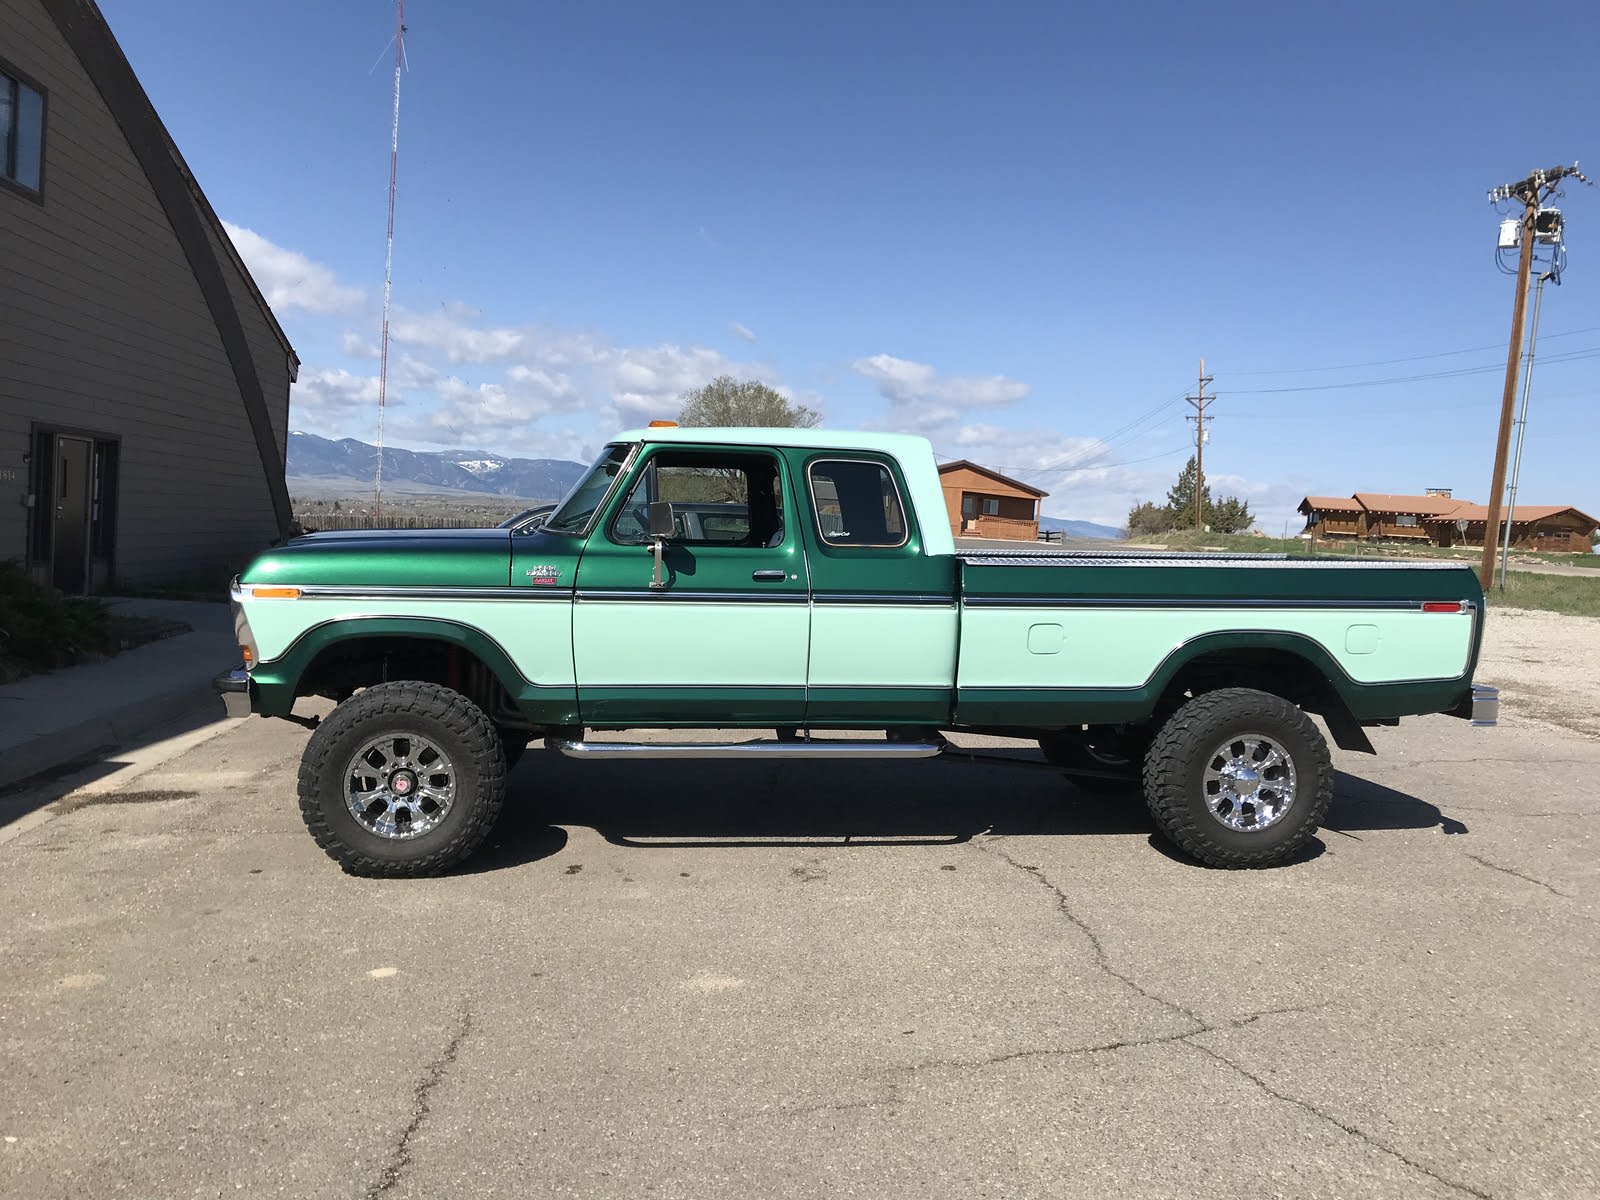 Ford F 150 Questions Waht Was The List Price For A 1979